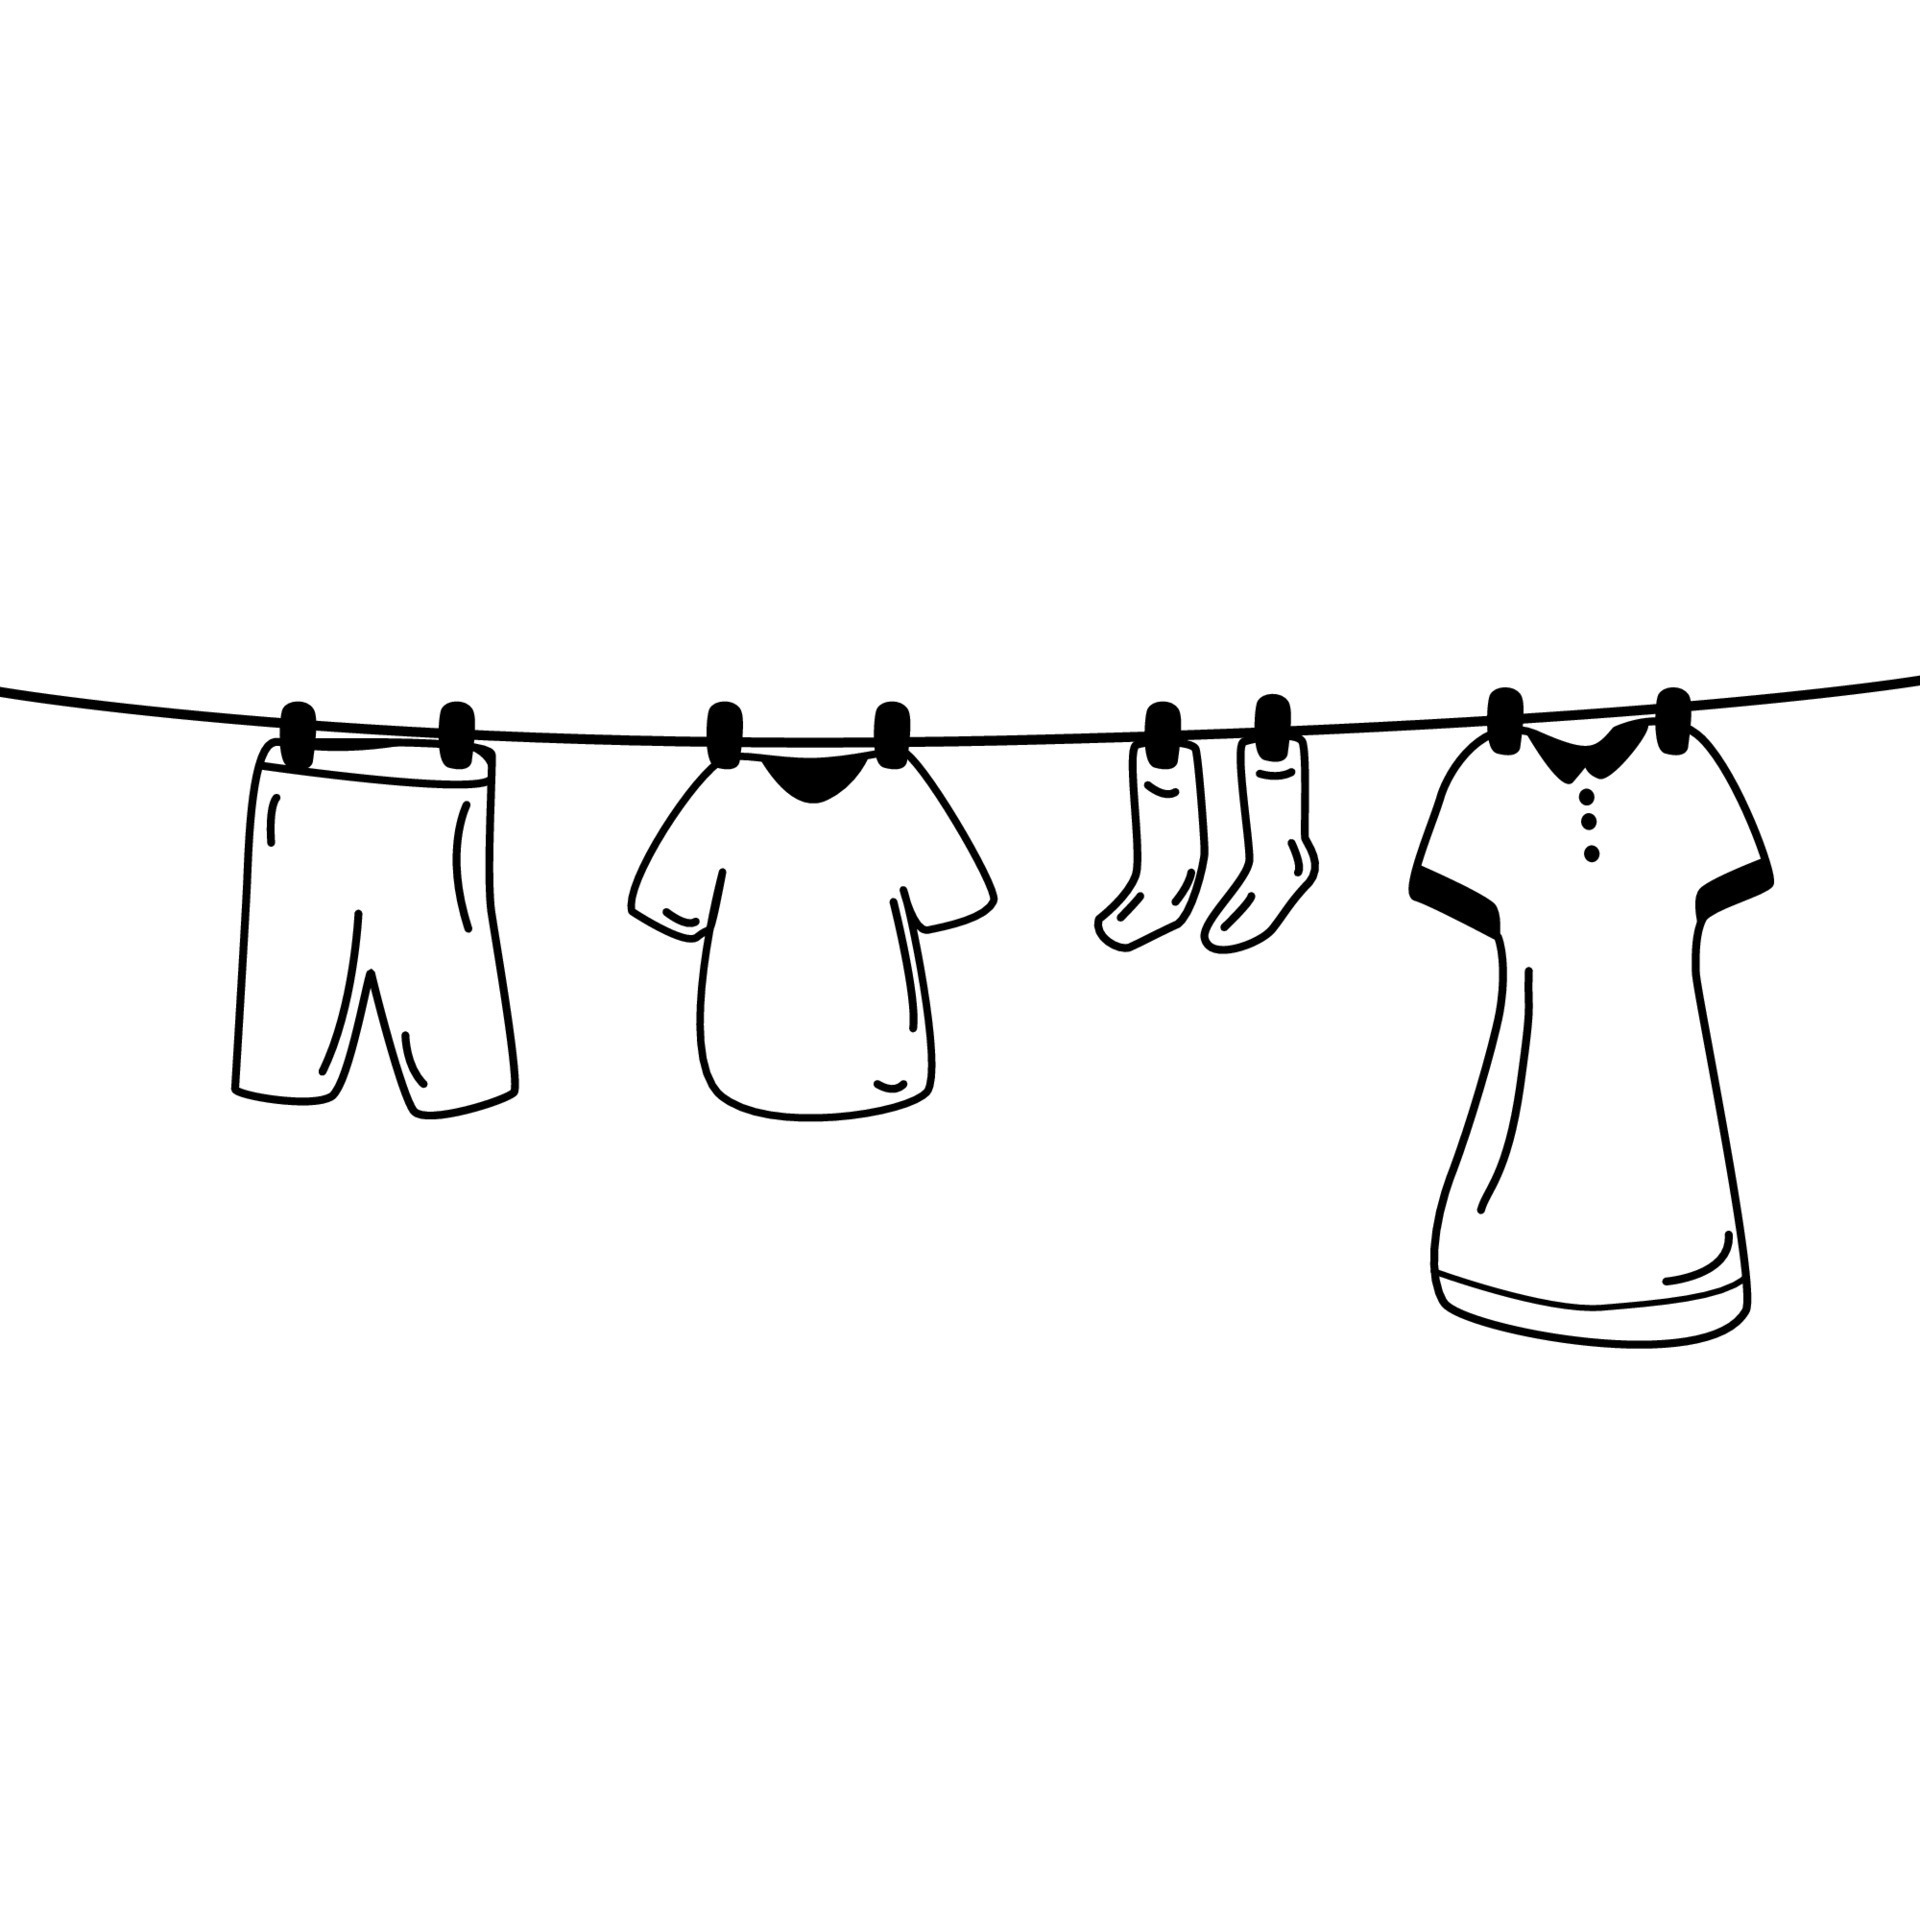 Rope for drying clothes with socks, underpants, T-shirt, shorts,dress ...